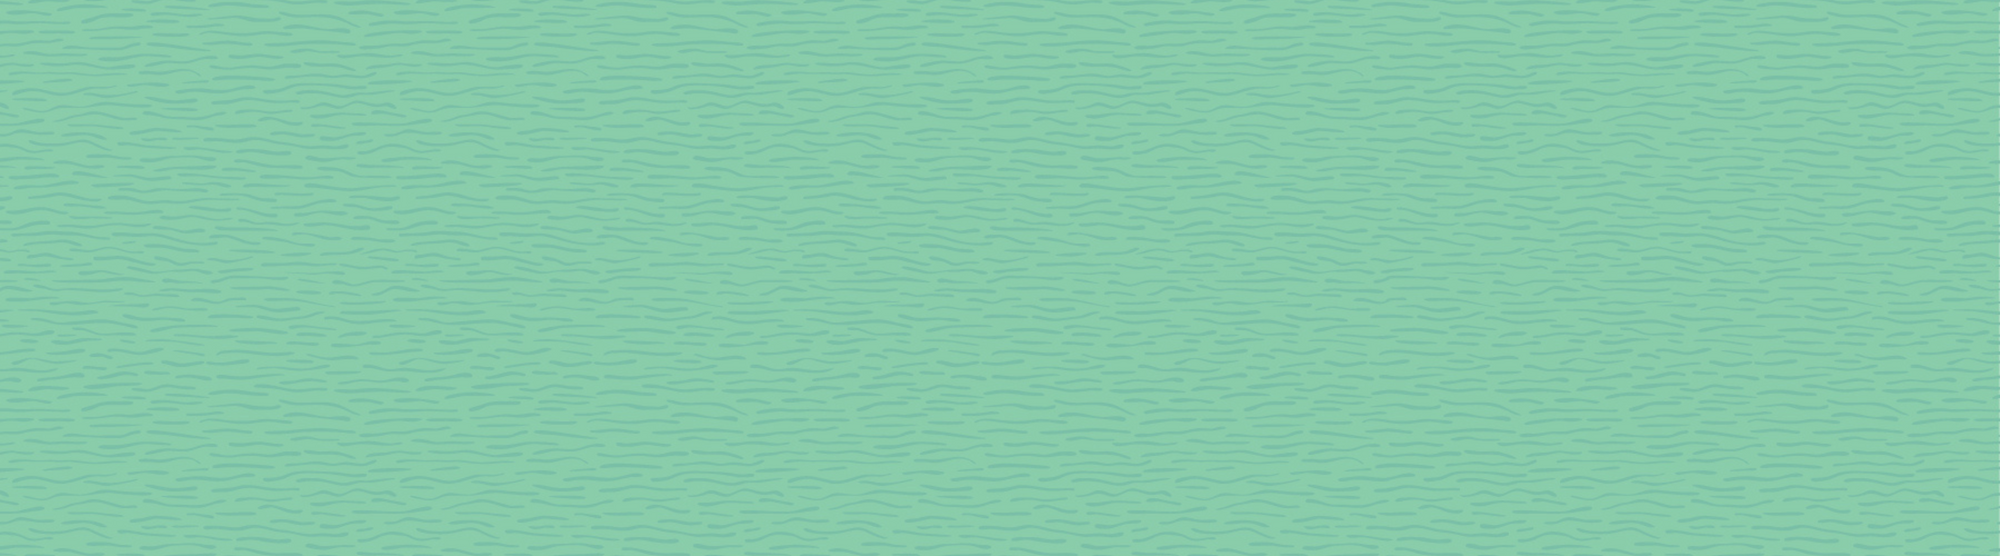 Green Waves Graphic 